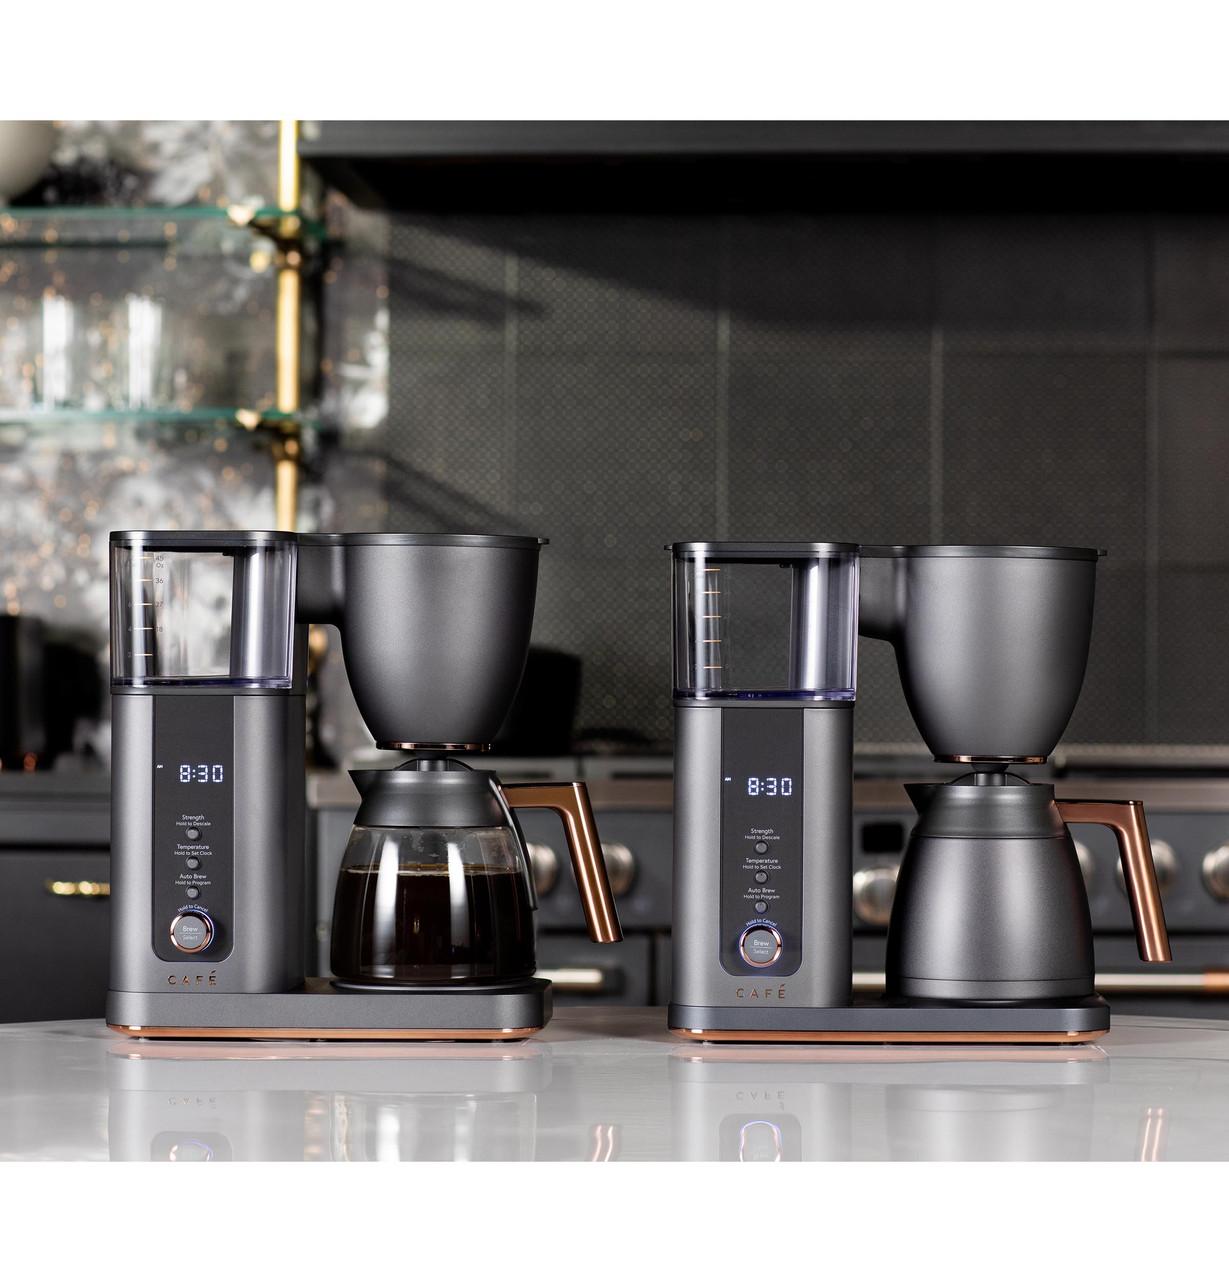 Cafe C7CDABS3RD3 Café&#8482; Specialty Drip Coffee Maker With Glass Carafe